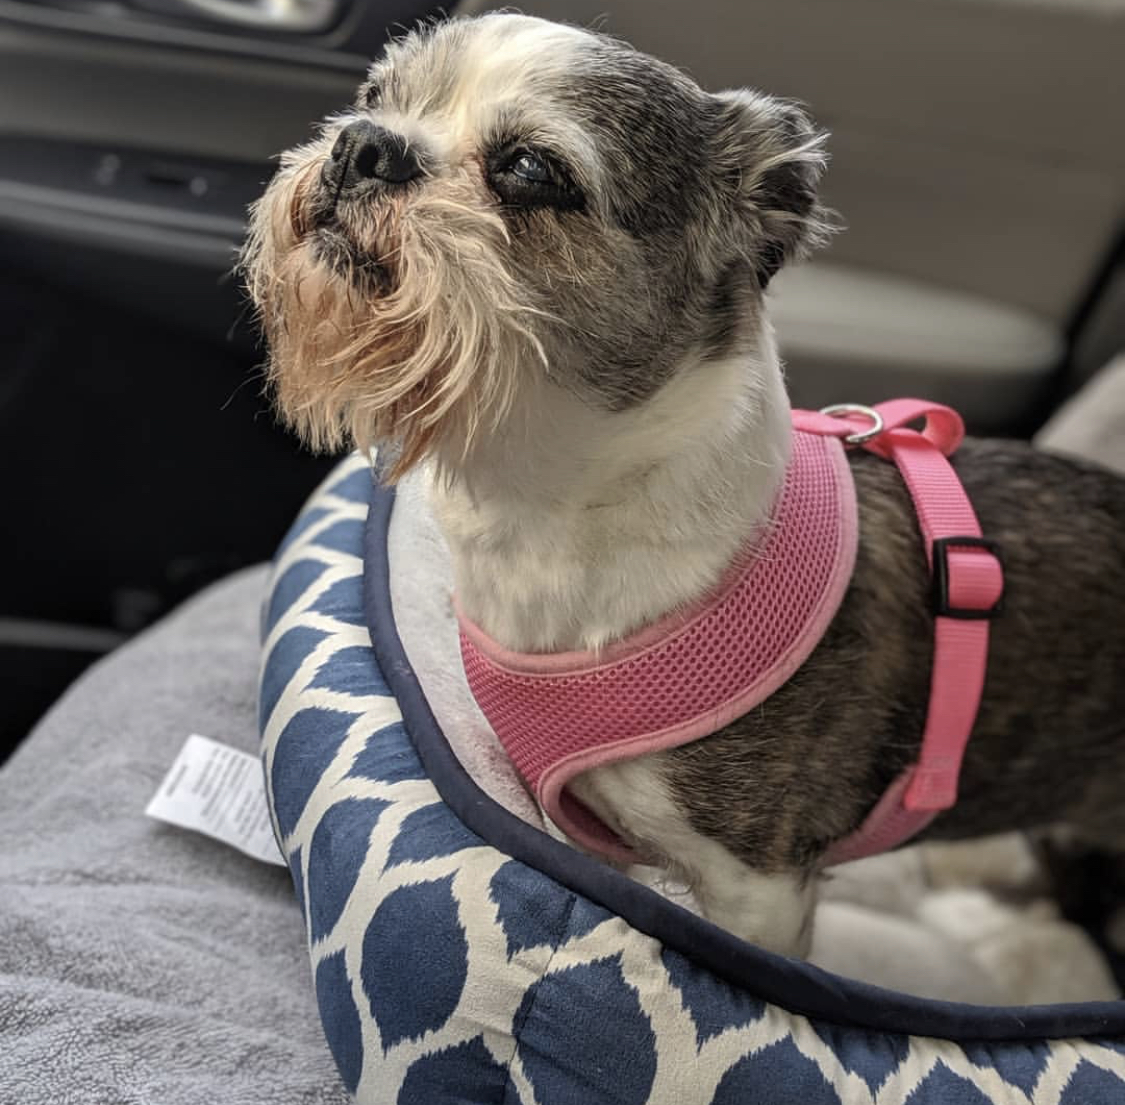 A Boston Tzu standing on its bed in the passenger seat